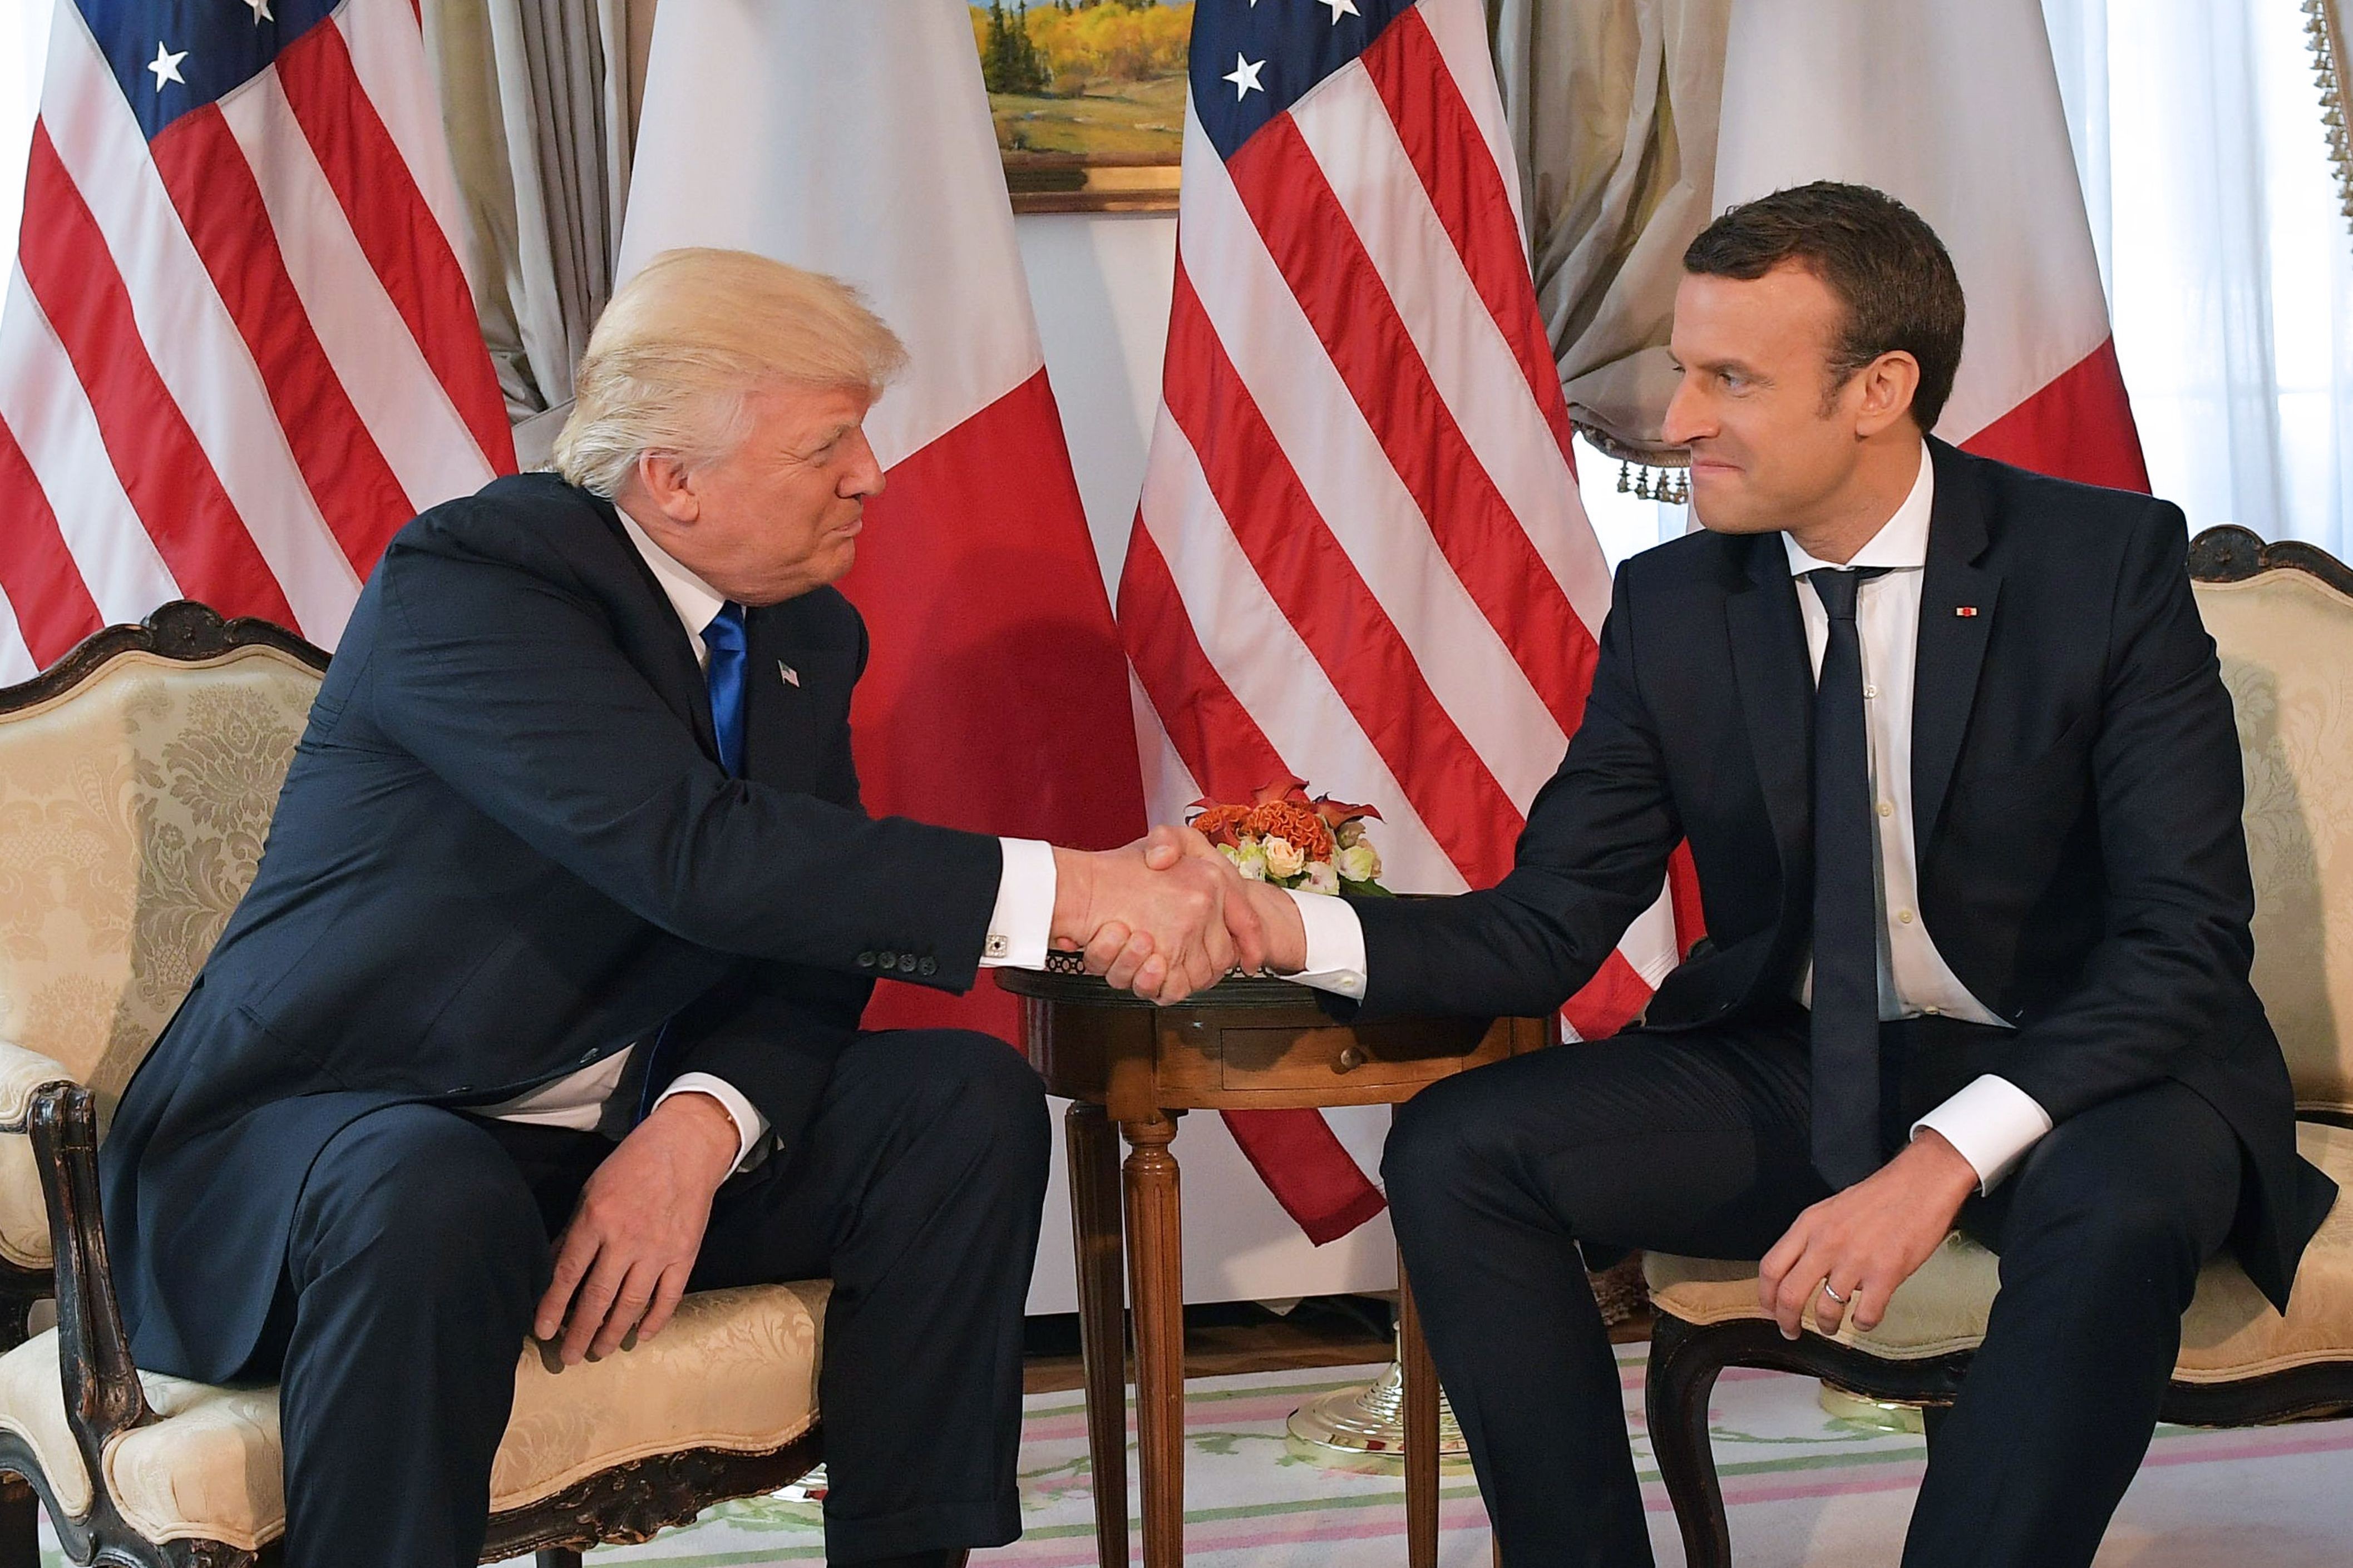 The brutal treatment the US president has meted out to a continent he neither understands nor likes has made it clear across EU capitals that depending on an alliance with America would be a folly